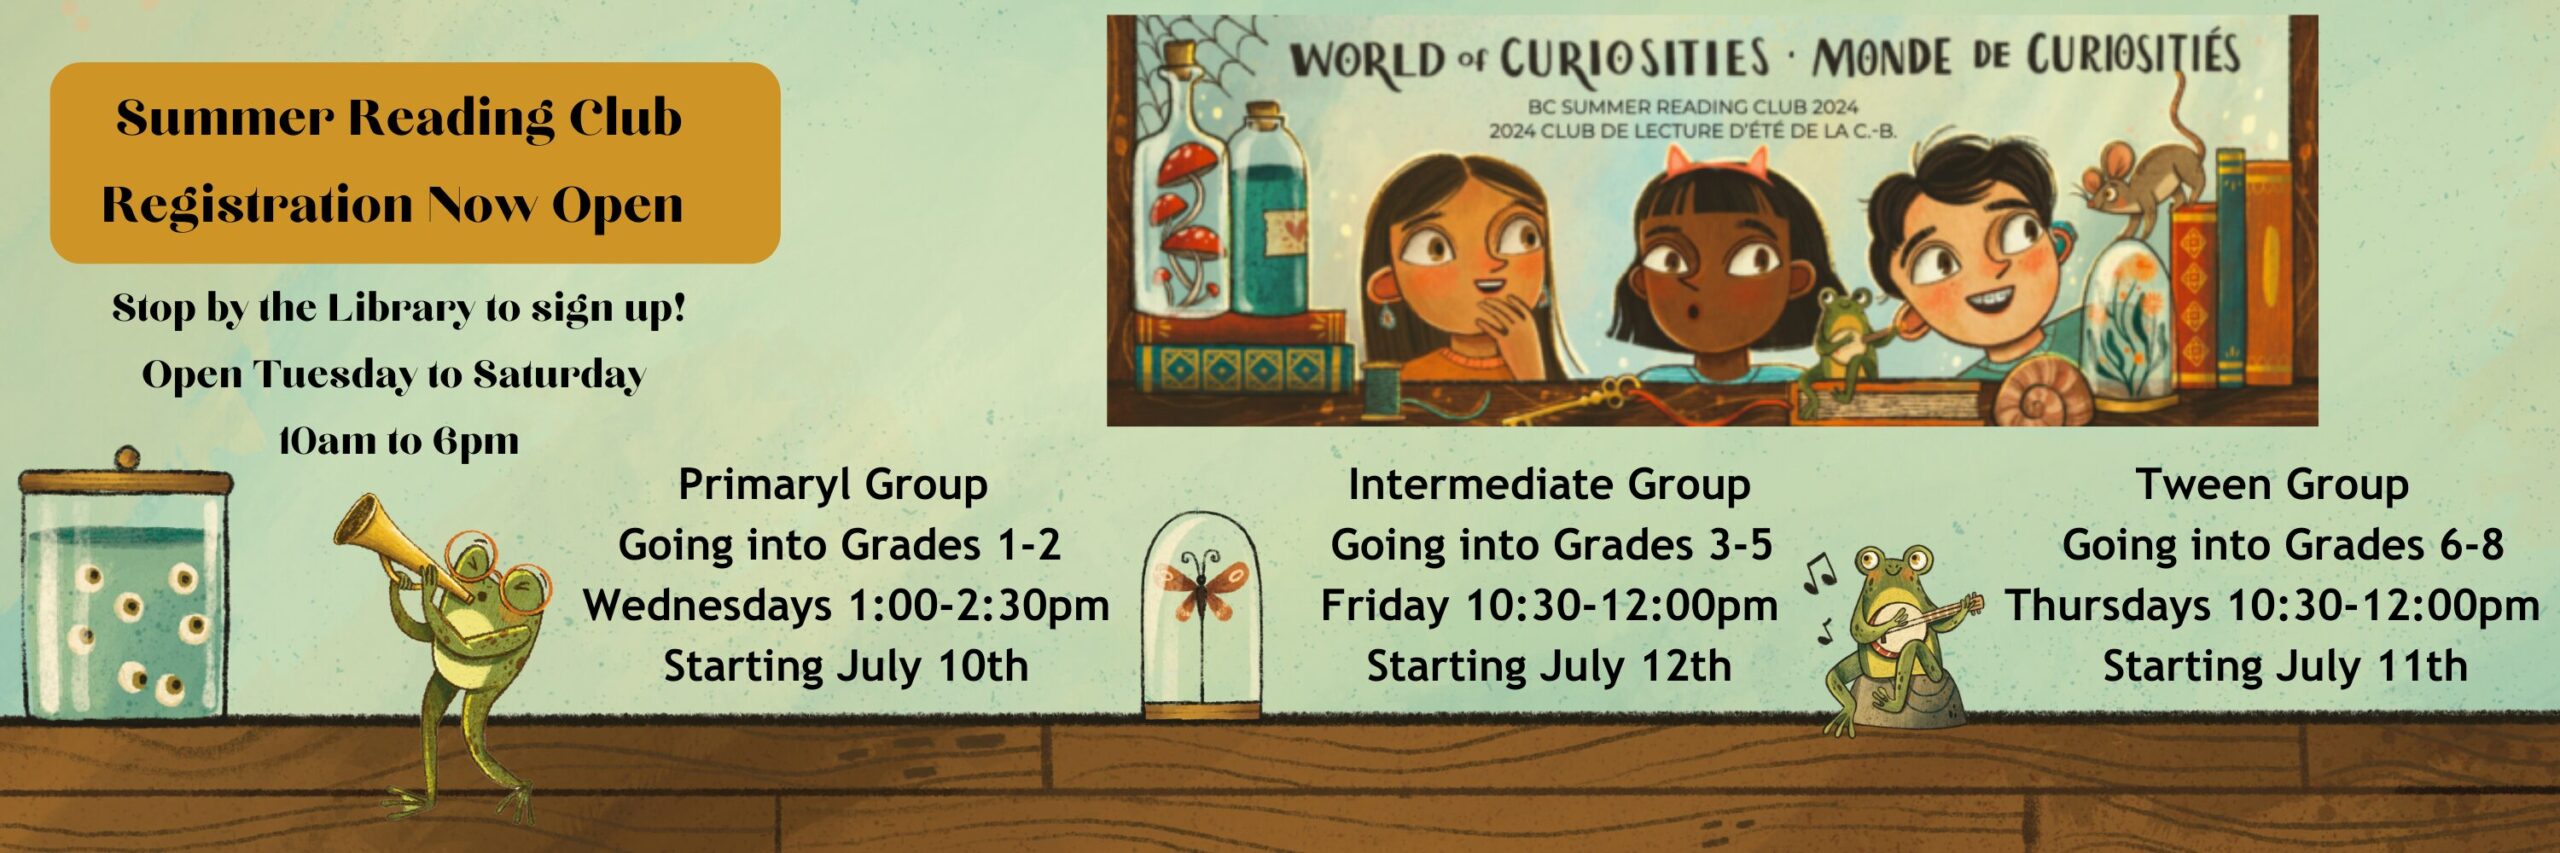 Summer Reading Club Web page banner